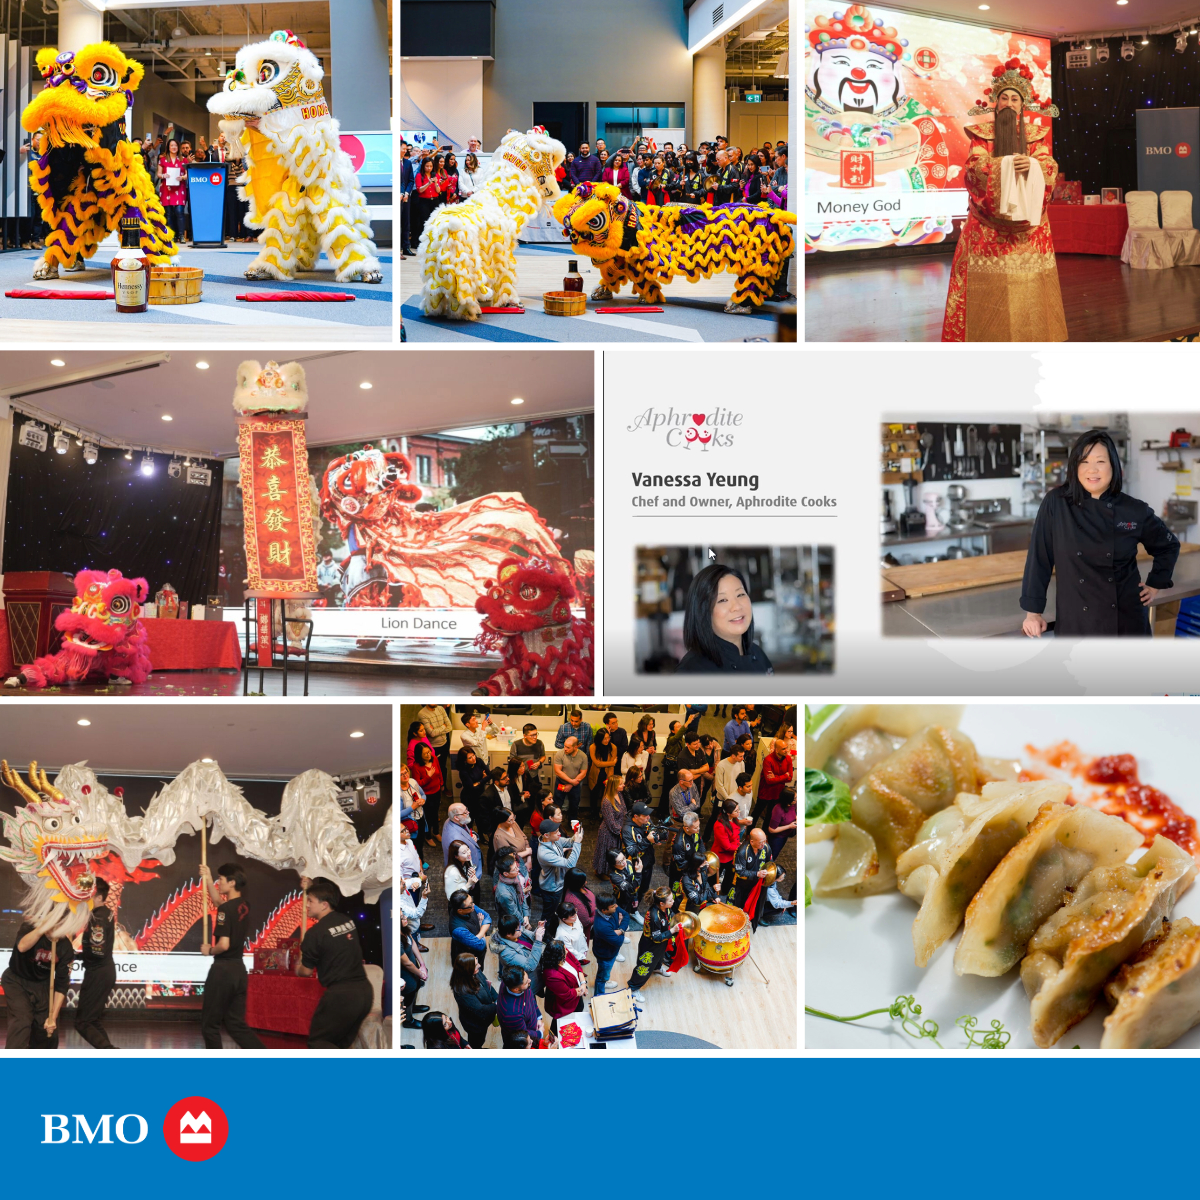 As we look towards Asian American and Pacific Islander Heritage Month, we want to take a moment to recognize our colleagues who came together to celebrate #LunarNewYear and the diverse cultures and traditions of the Asian community.